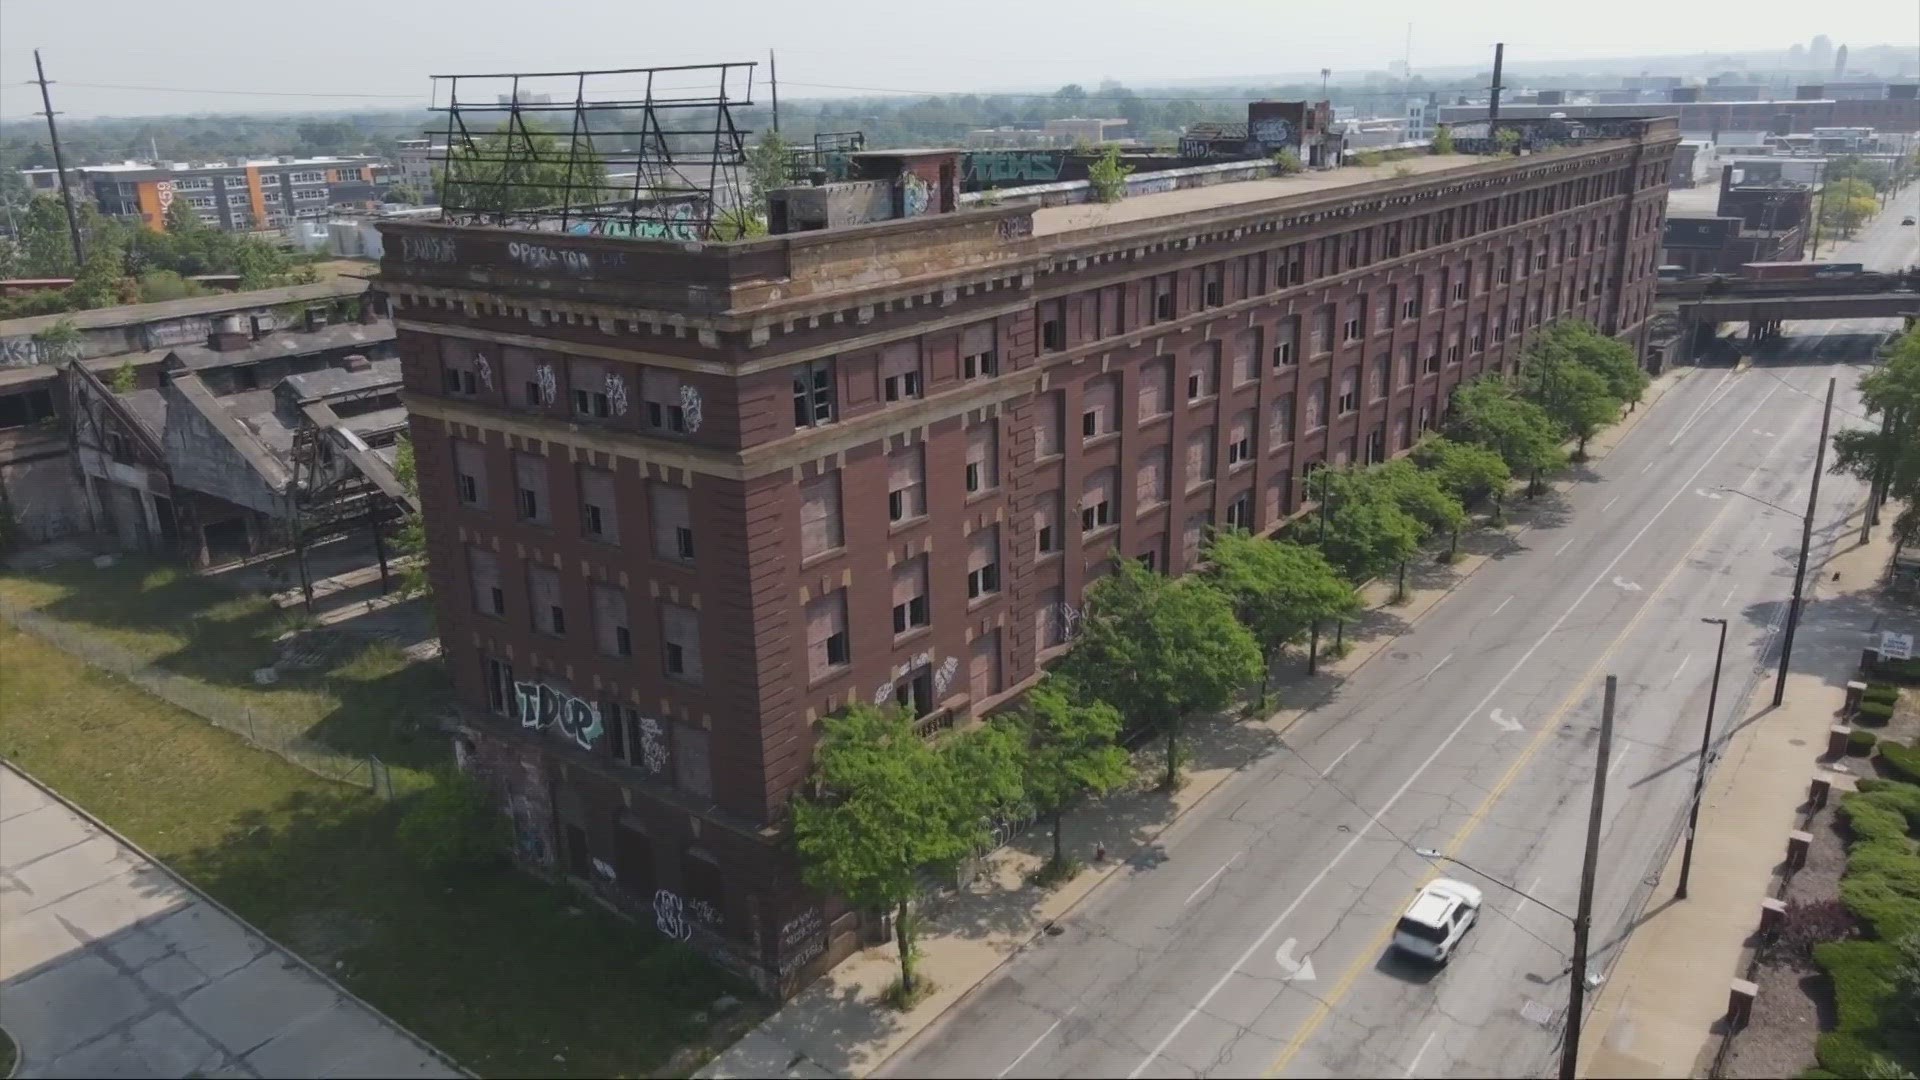 For over 40 years the abandoned Warner & Swasey Company building has been waiting for its next phase in life.